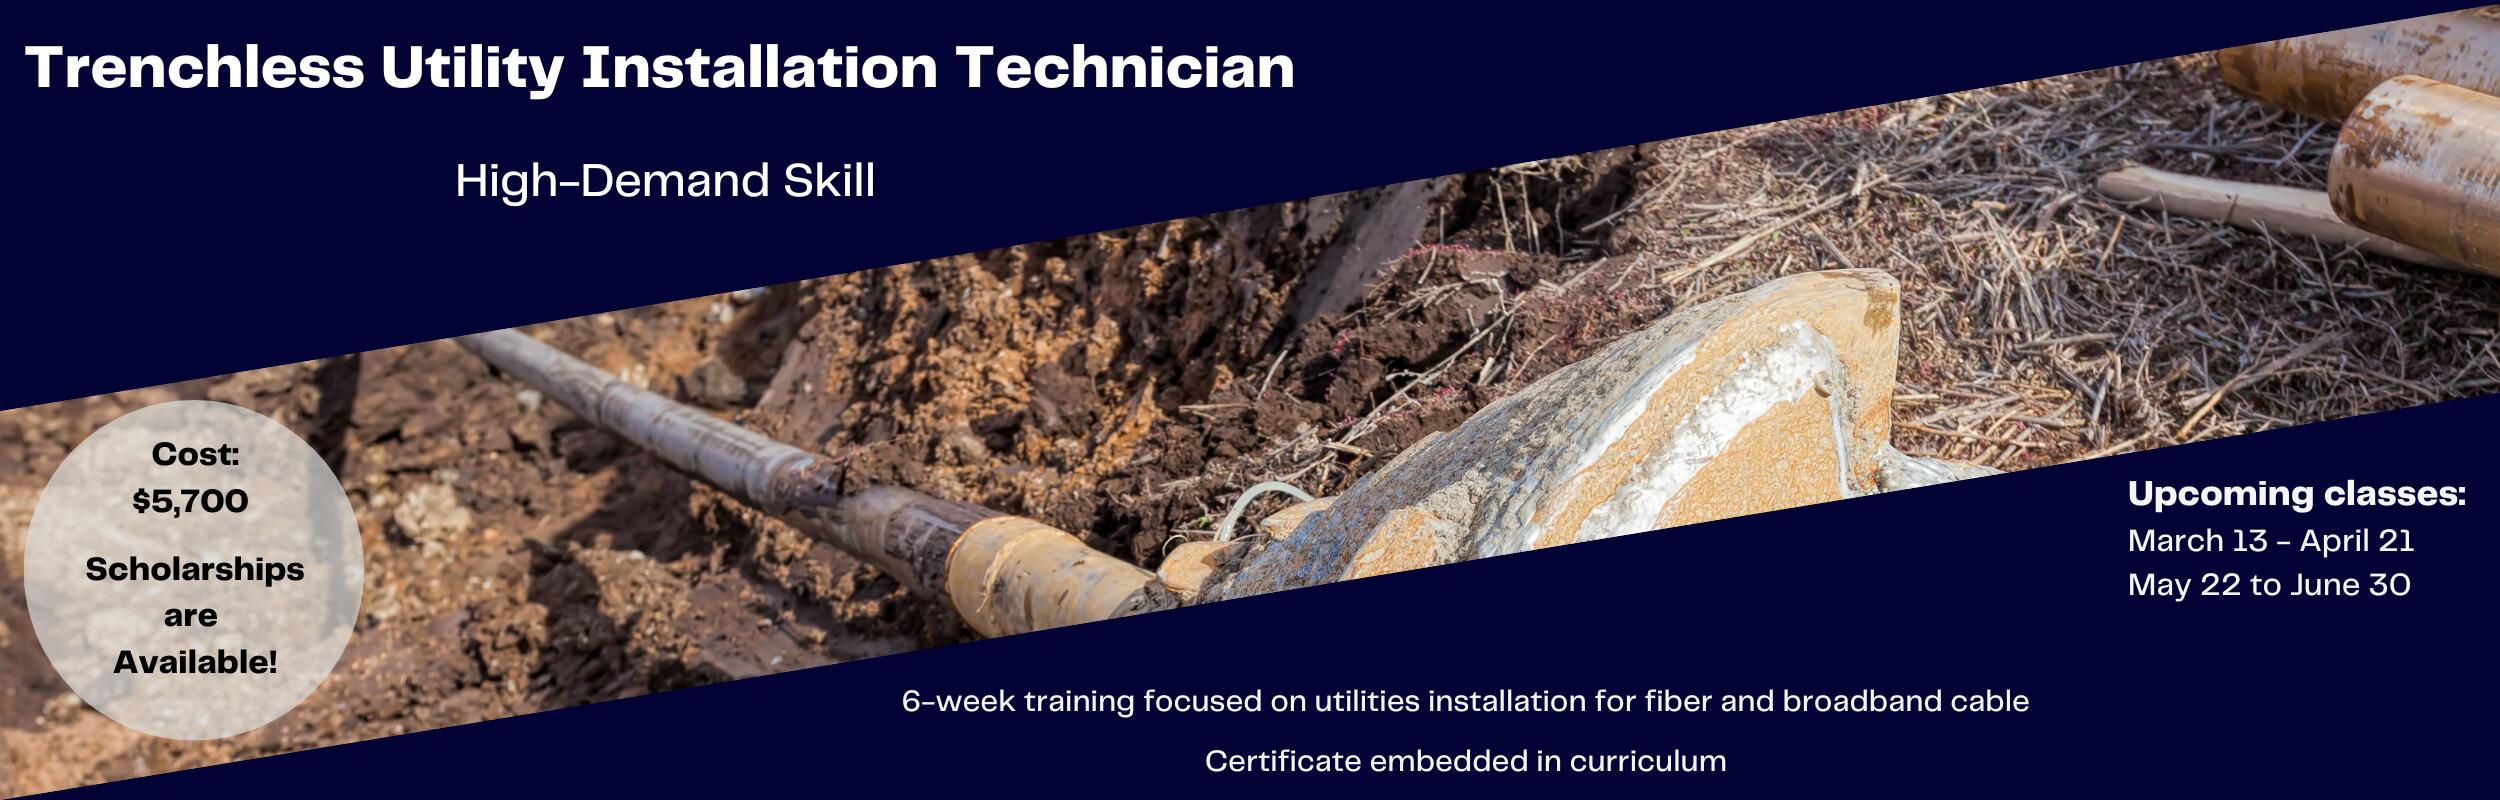 Trenchless Utility Technician advertising for enrollment